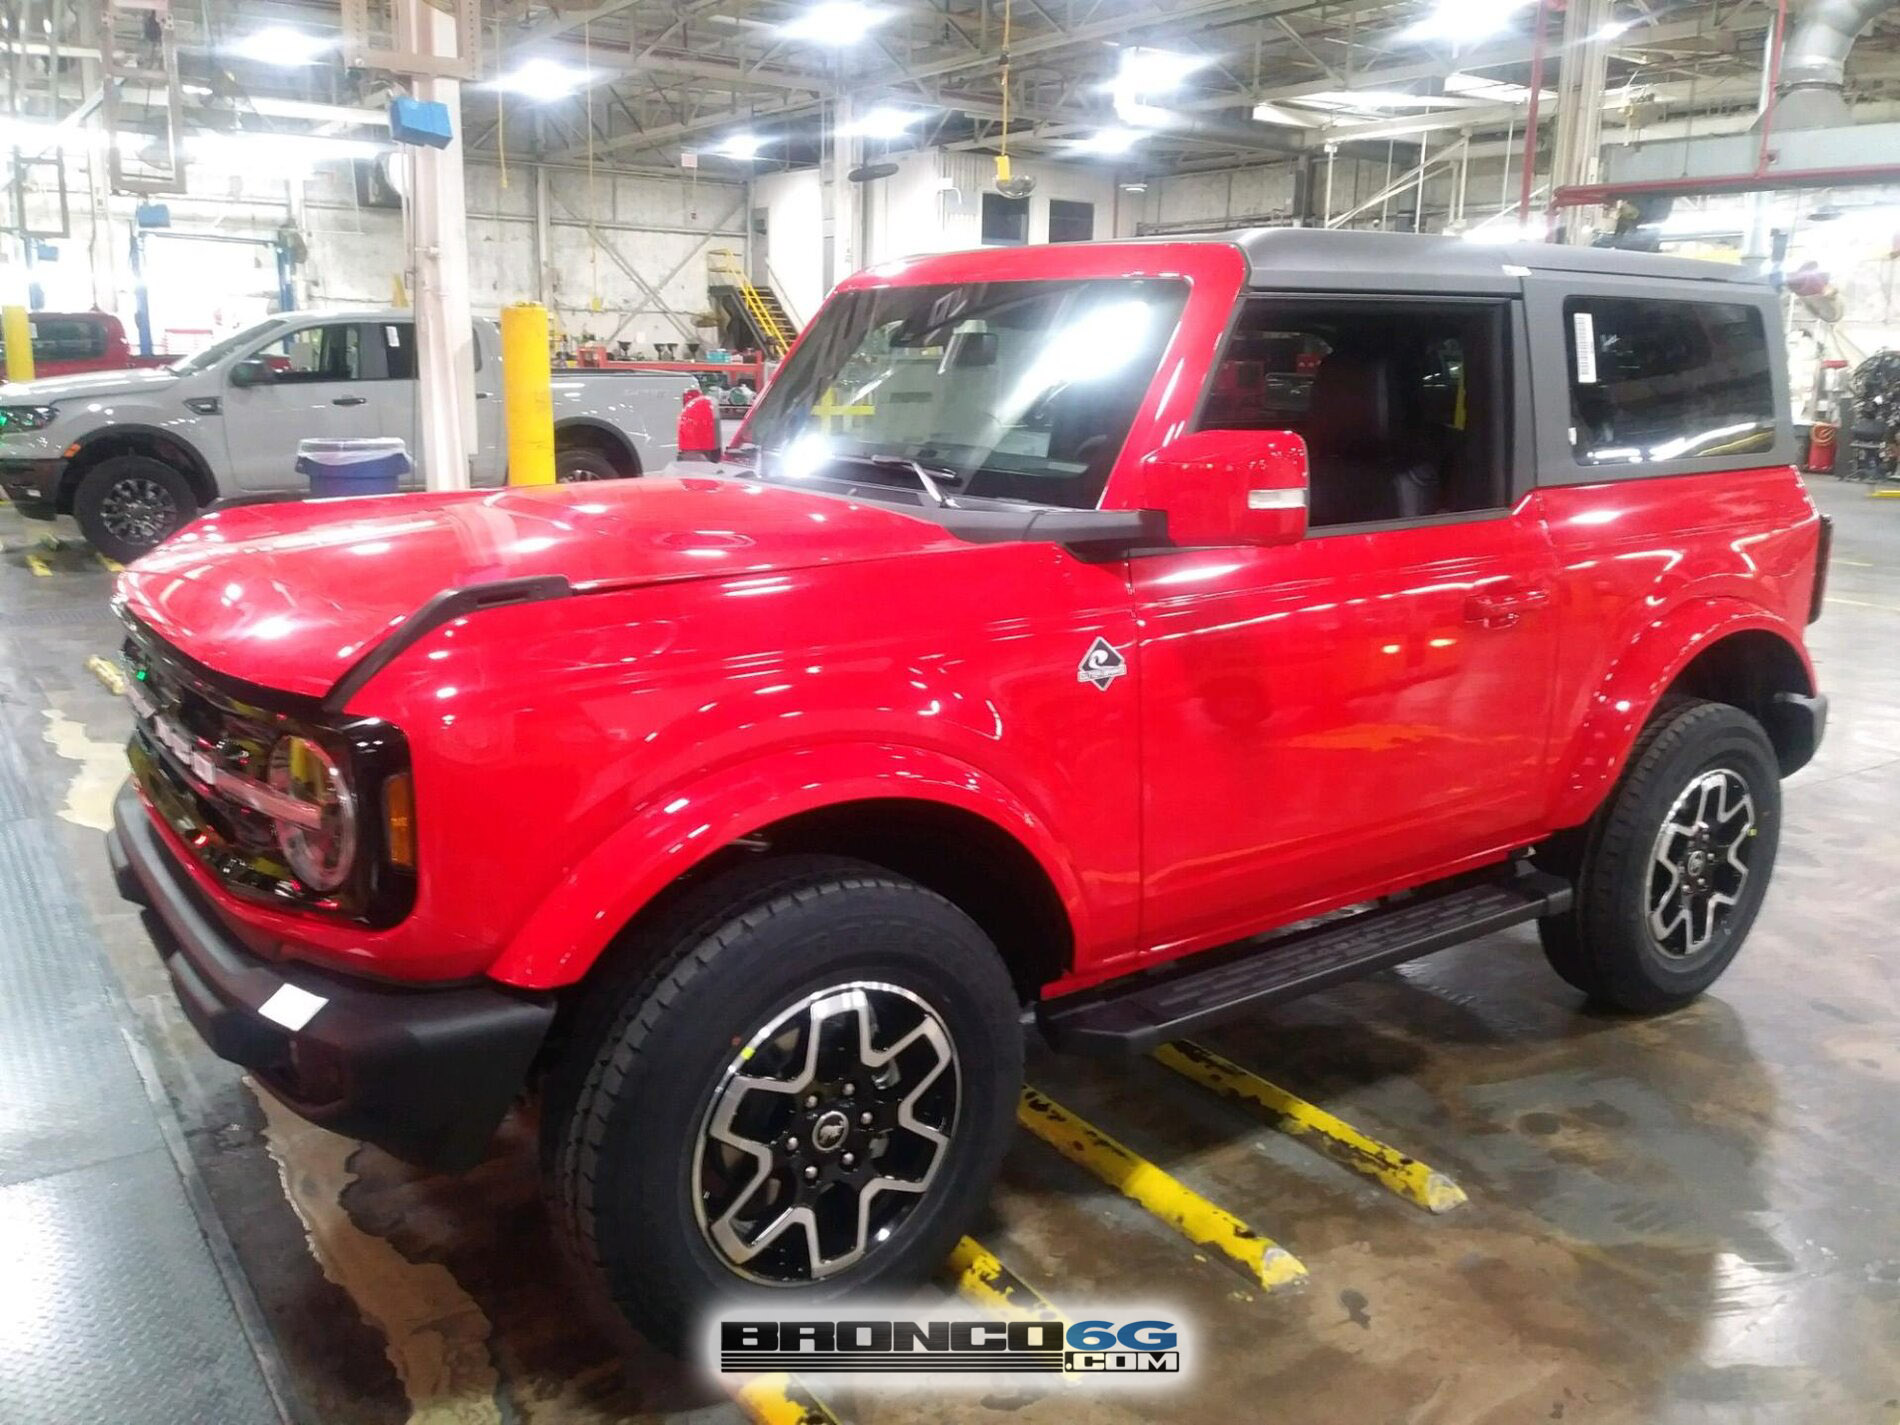 2021 Bronco Outer Banks Leather interior factory production line photos 32 Race Red 2.jpg